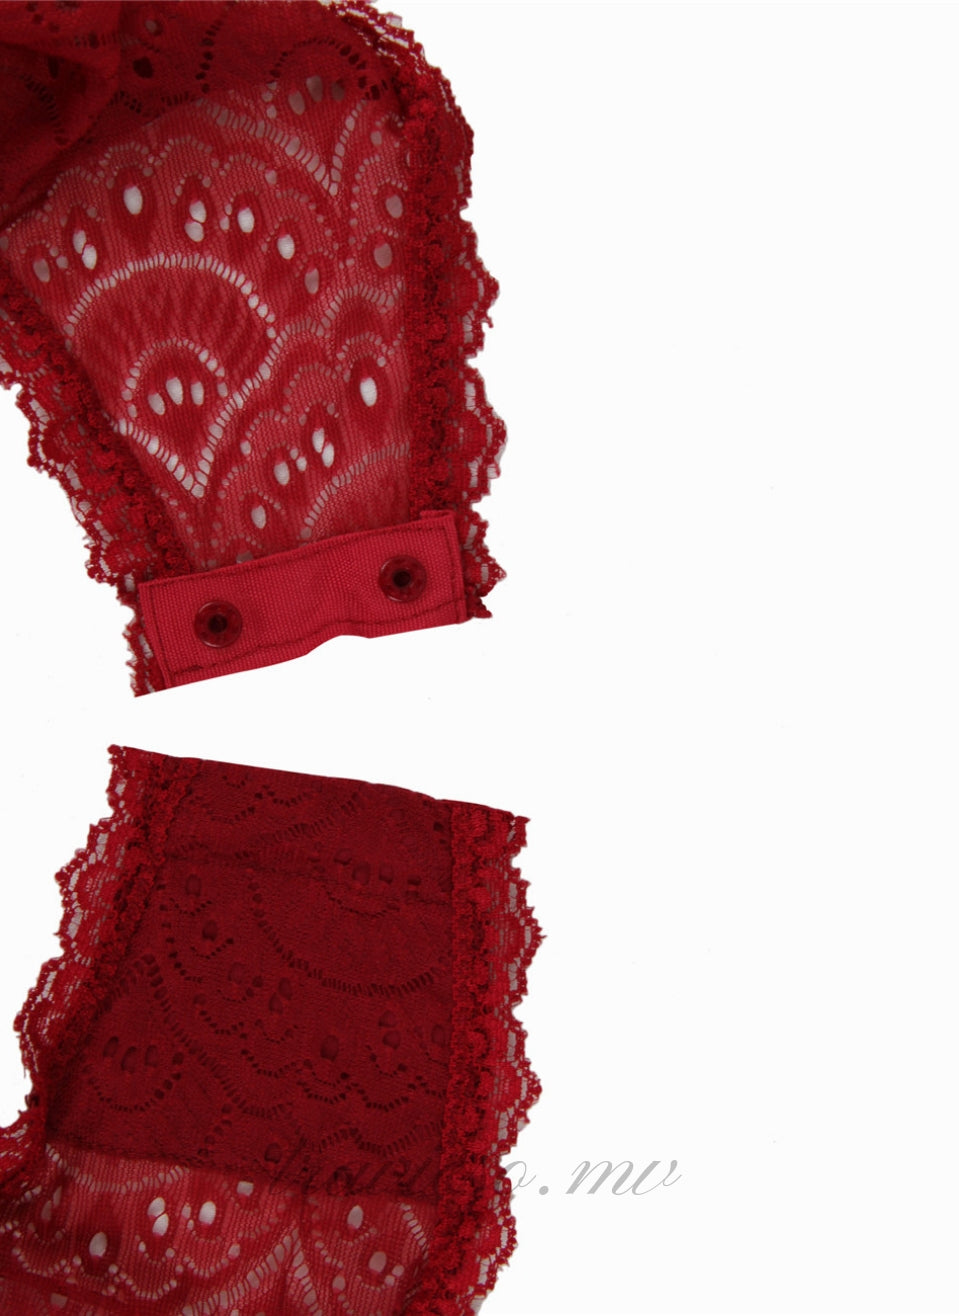 Exquisite pattern Lace Teddy